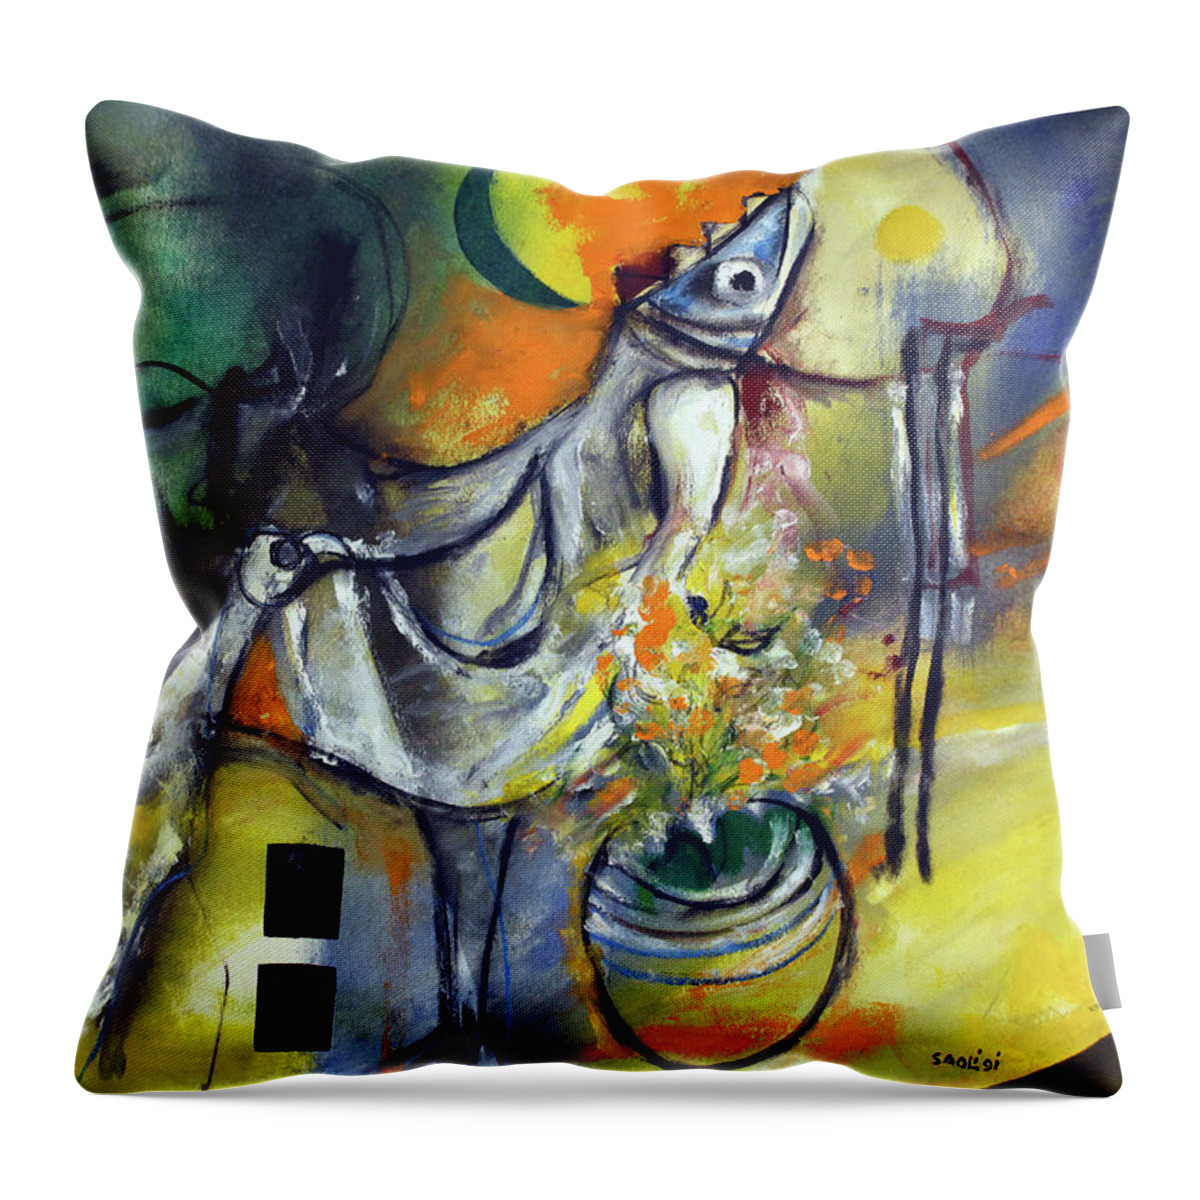 African Art Throw Pillow featuring the painting Fishbirdman I am by Winston Saoli 1950-1995